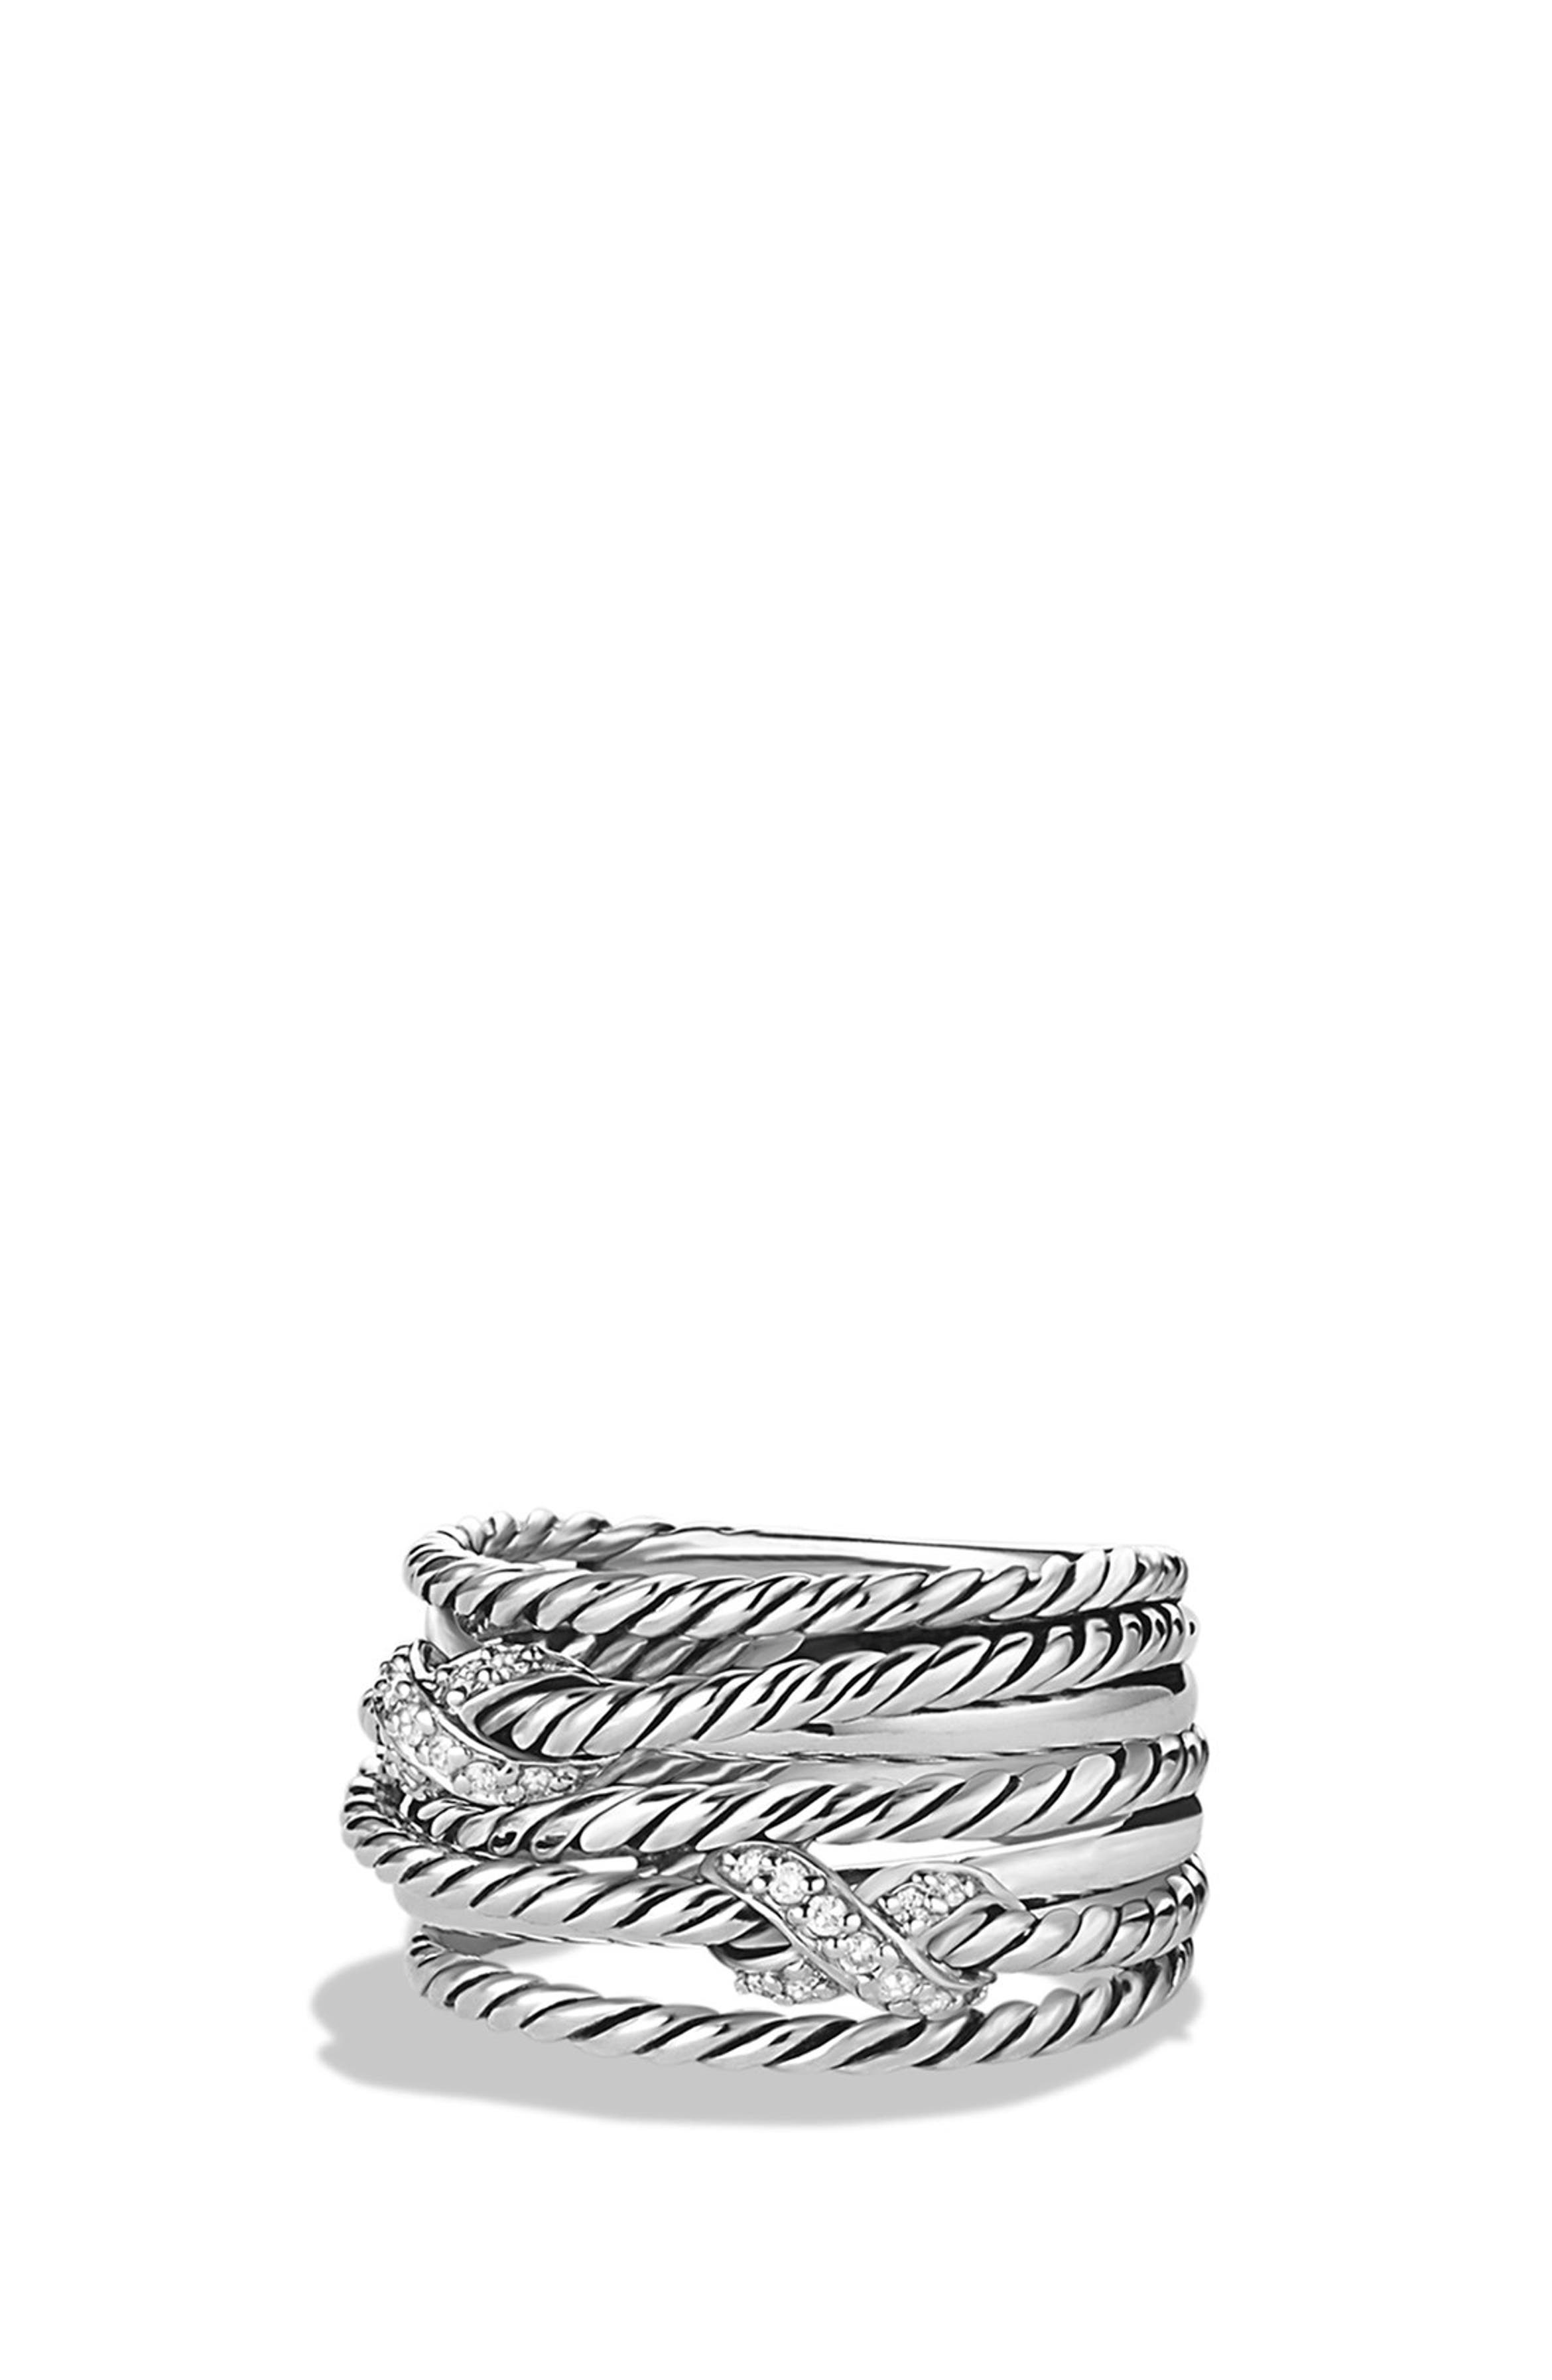 David Yurman Double 'X Crossover' Ring with Diamonds | Nordstrom